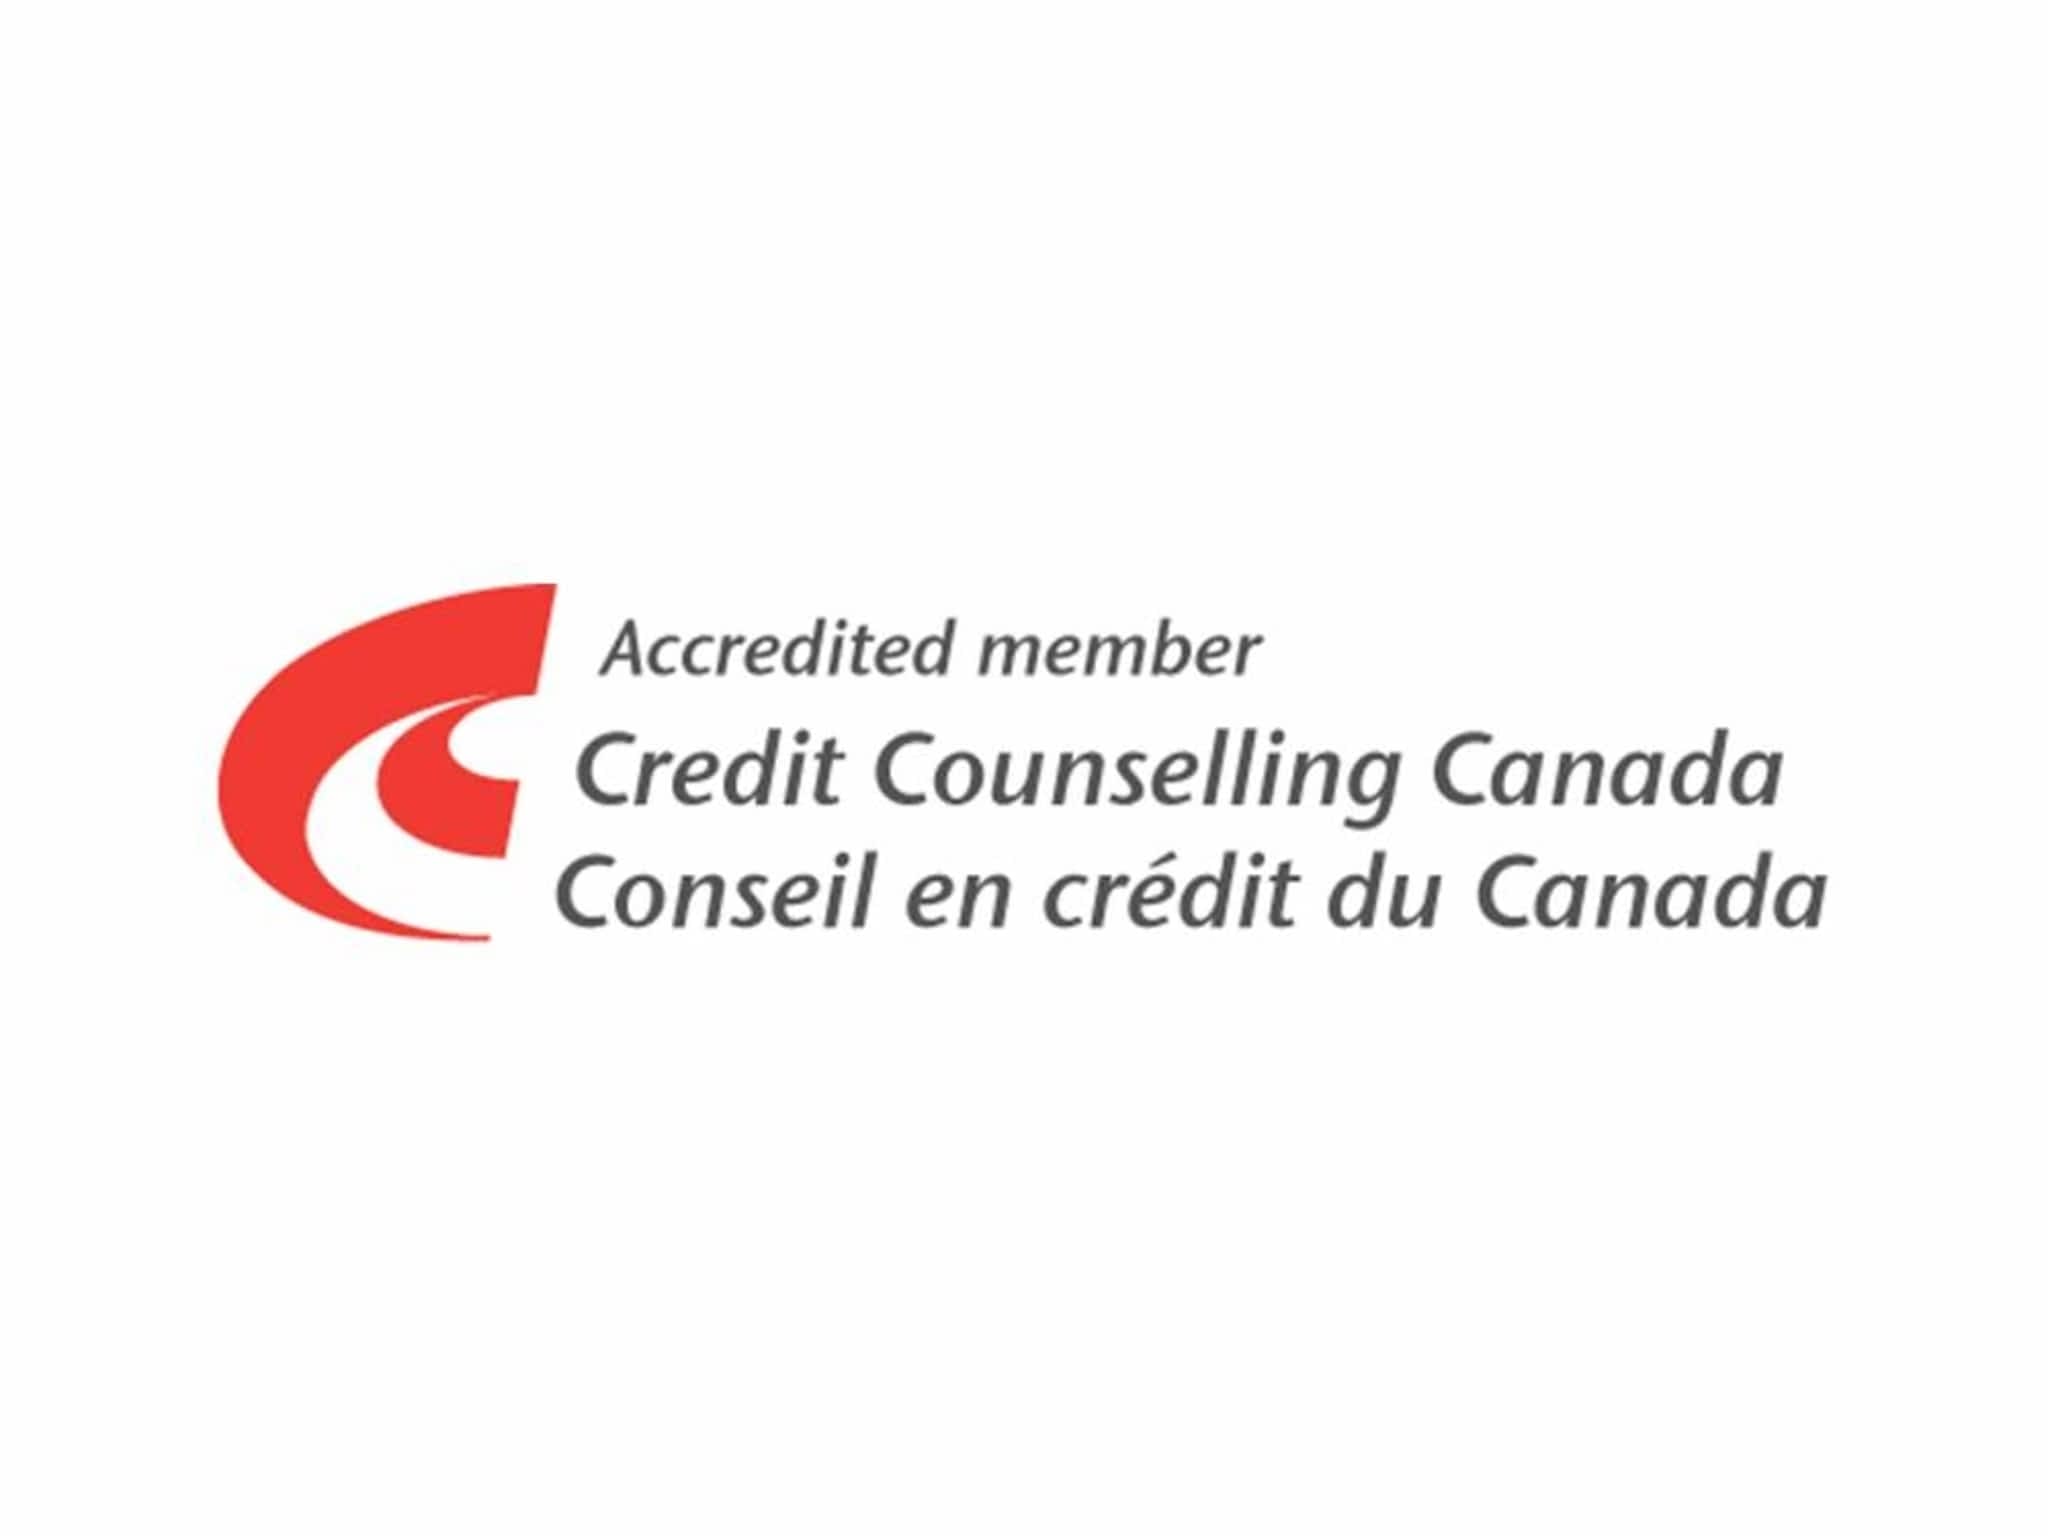 photo Credit Counselling Society London | FREE Debt Help